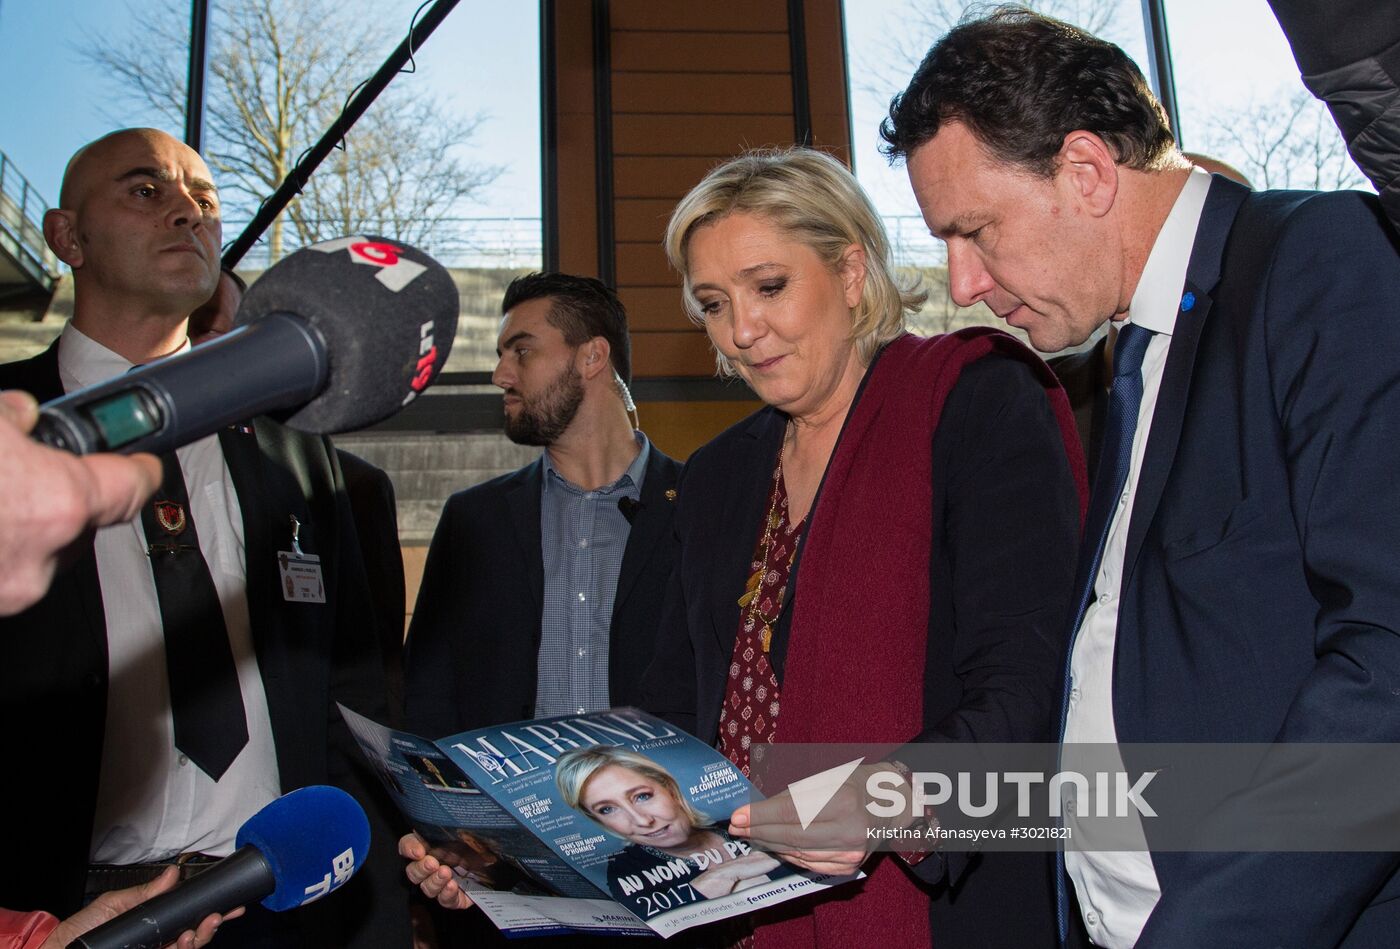 Marine Le Pen’s election campaign for the French presidency